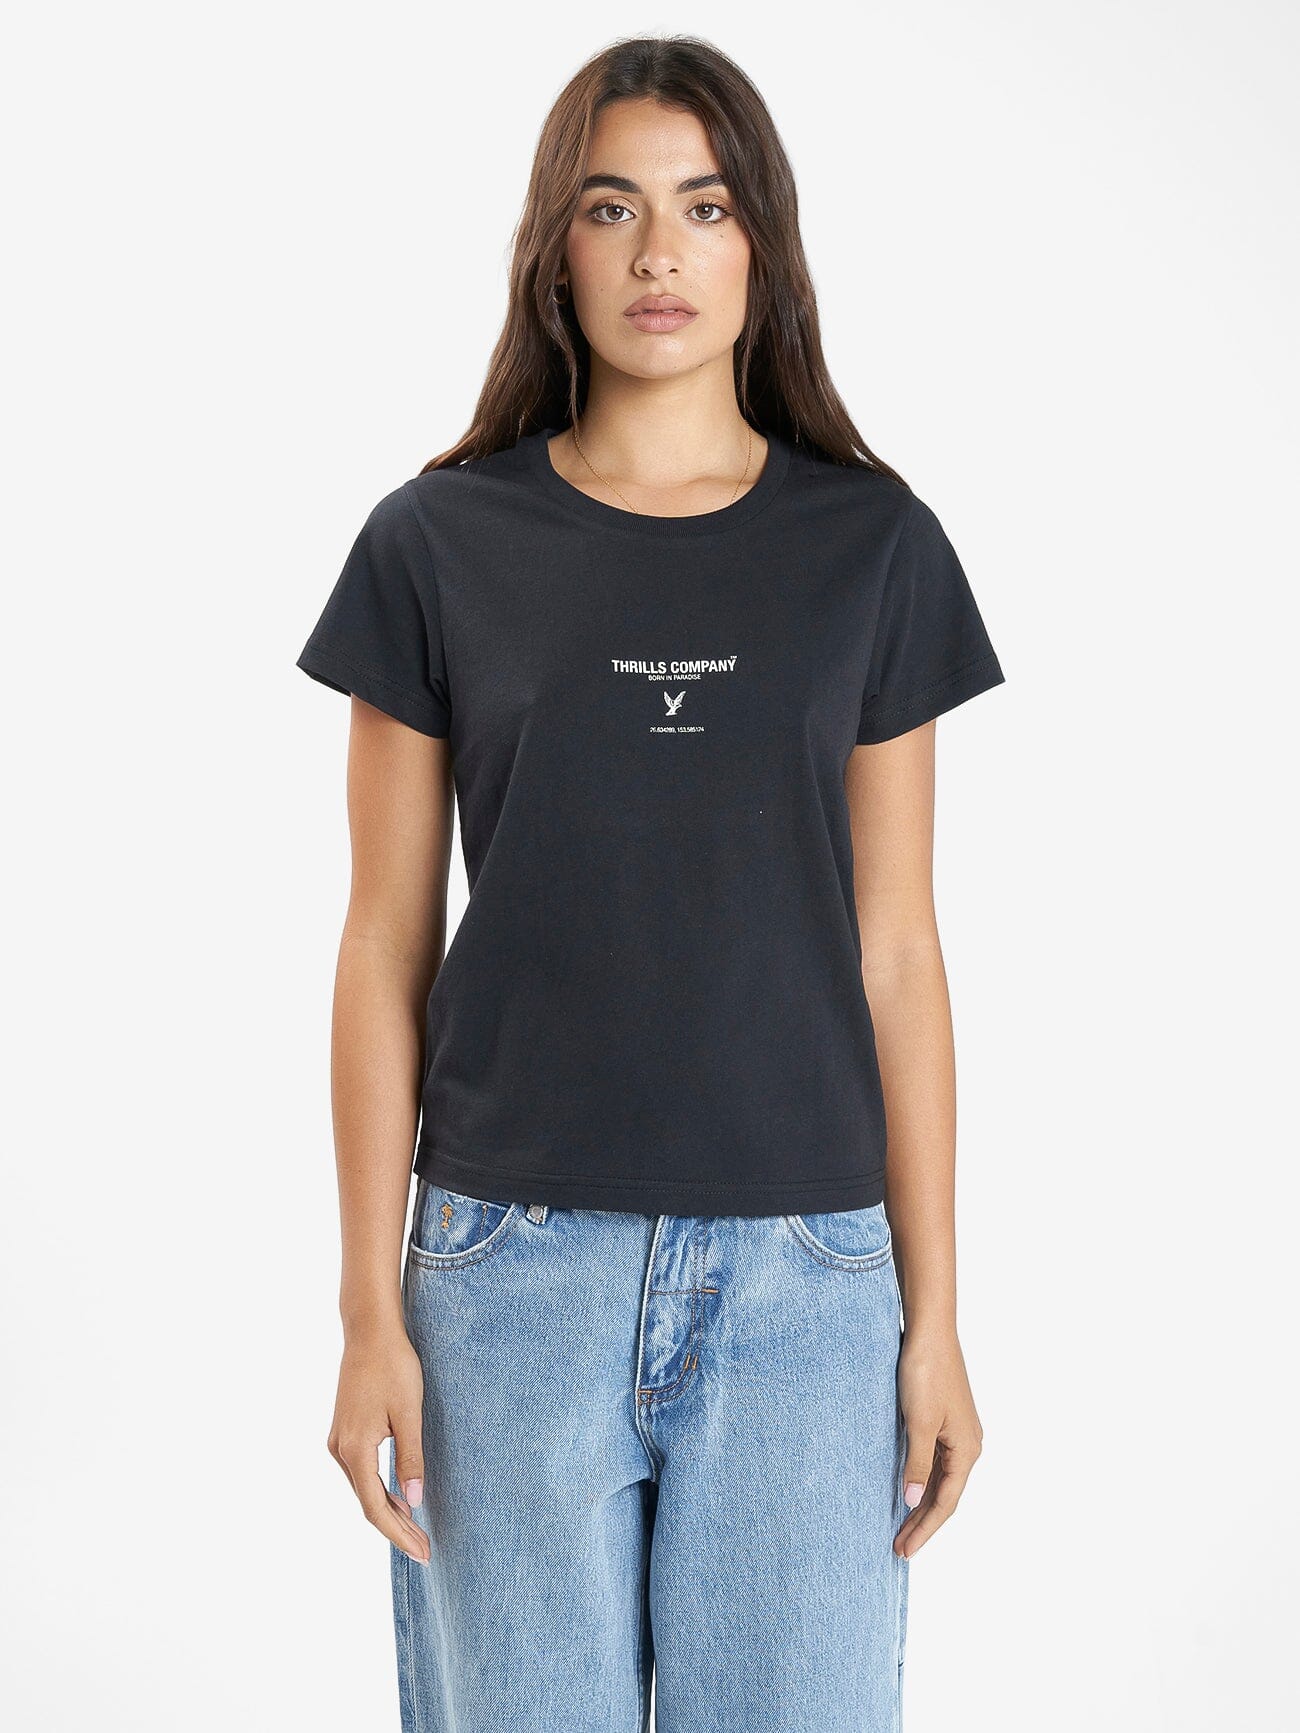 Honour Everyday Tee - Washed Black 4